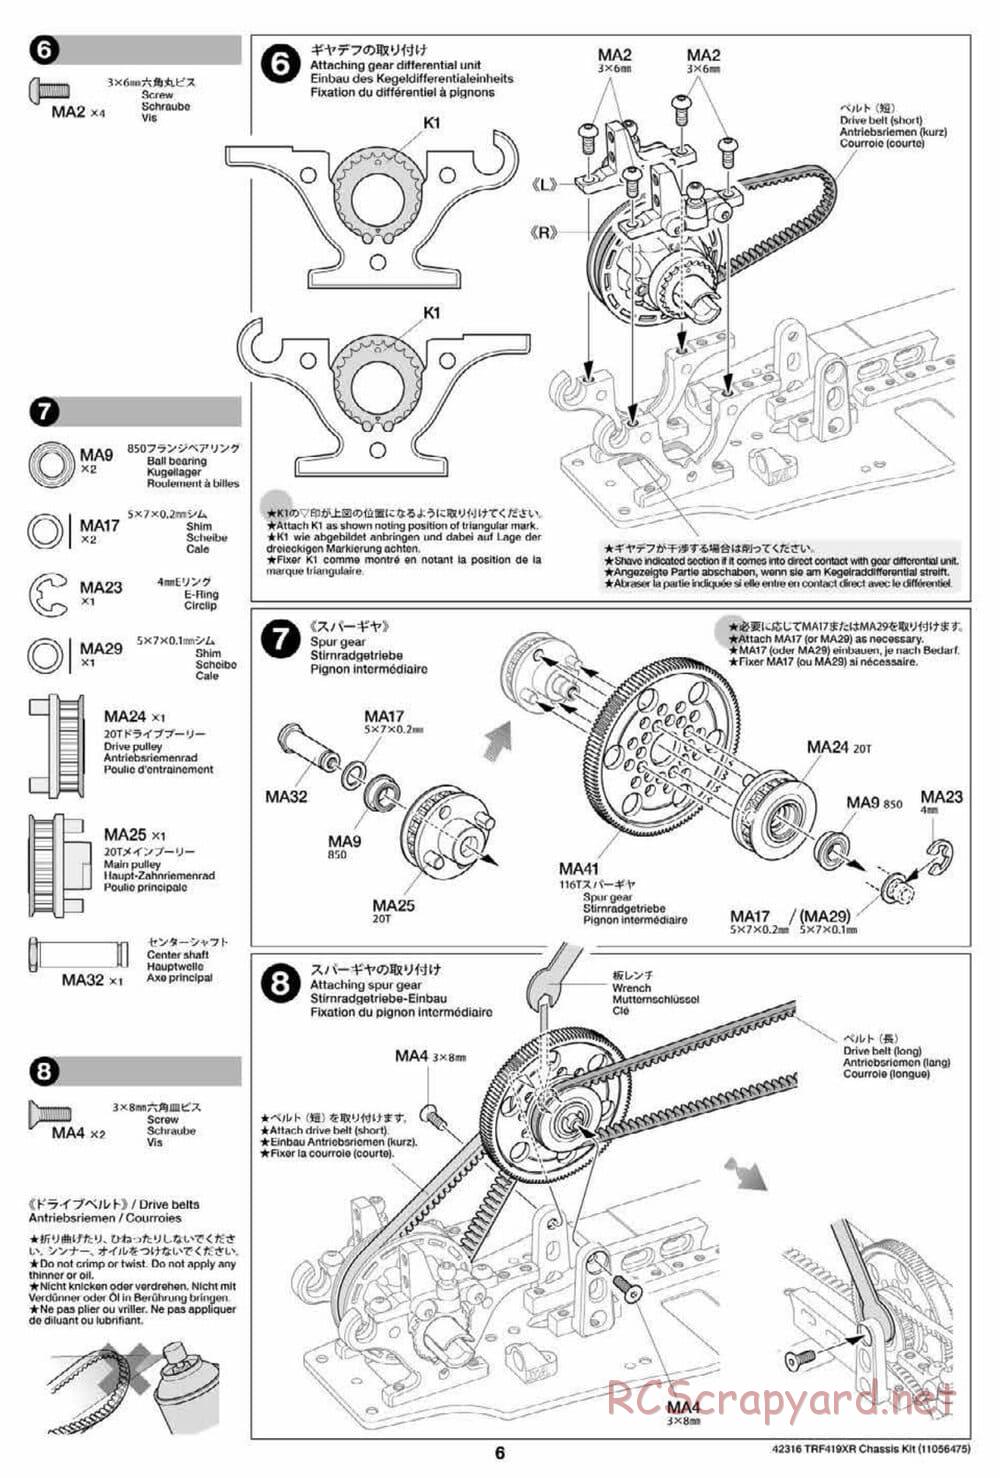 Tamiya - TRF419XR Chassis - Manual - Page 6